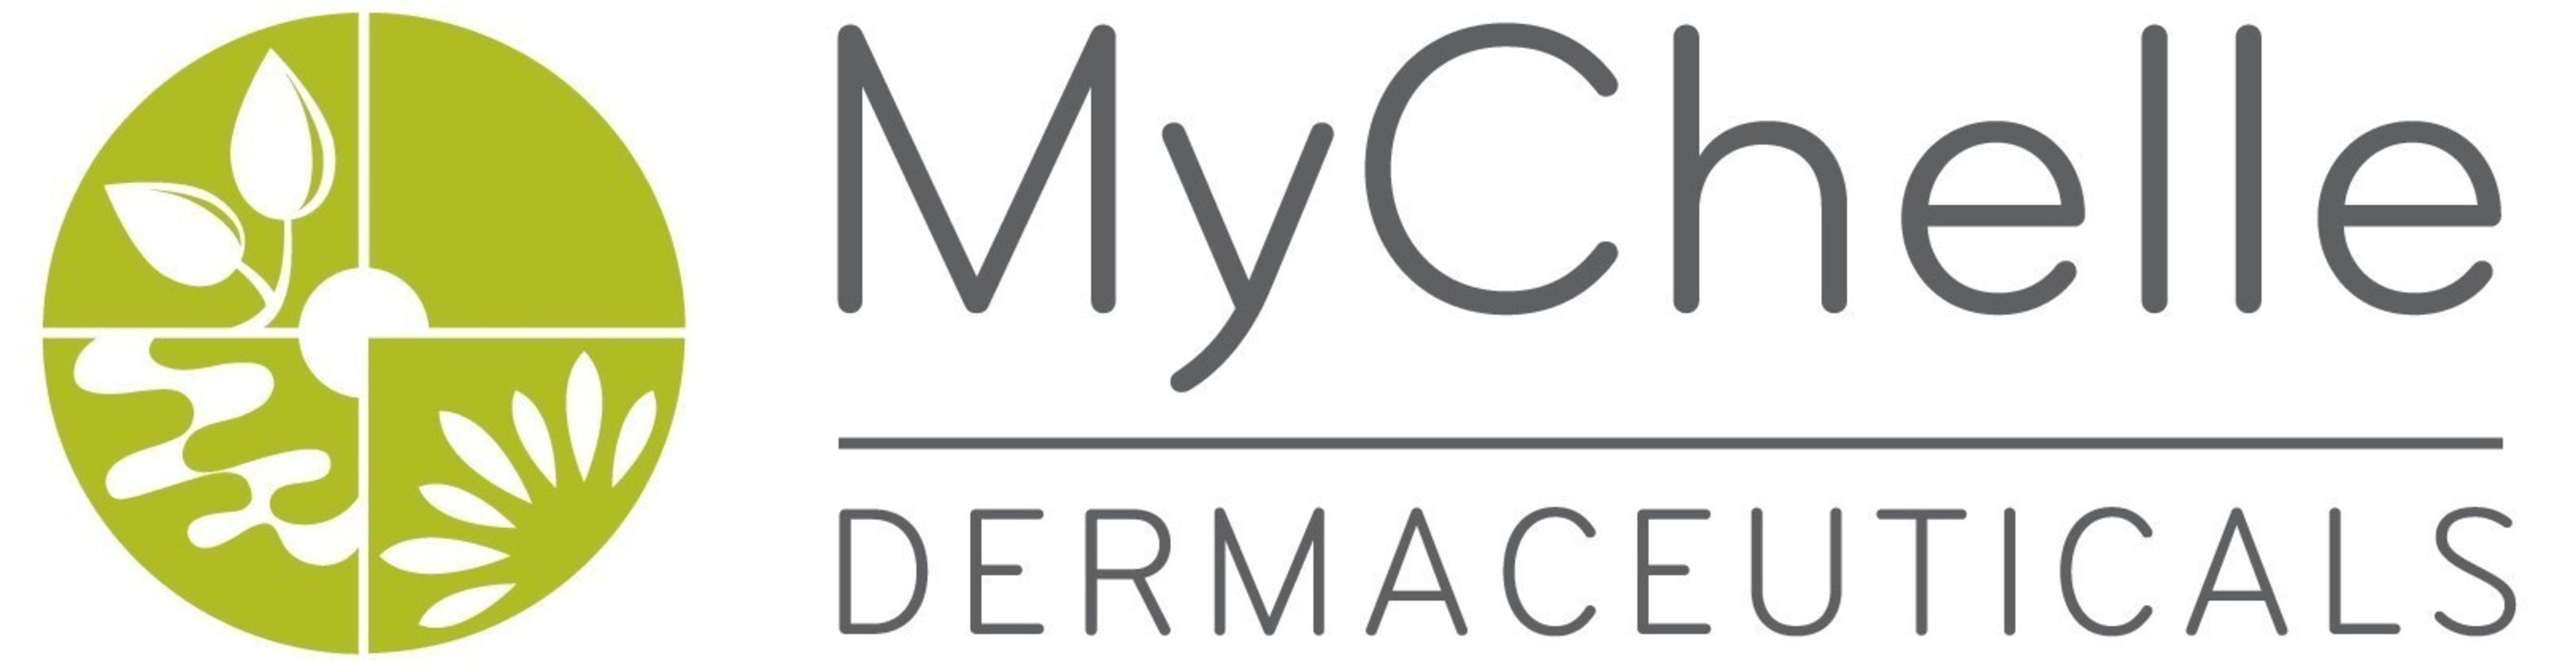 This spring, MyChelle Dermaceuticals is partnering with the Environmental Working Group (EWG) to promote its Sun Safety public awareness campaign, which launches May 1. "Practice Smart Sun" aims to provide the public information and advice for reducing the risks of skin damage and diseases related to inadequate sun protection.